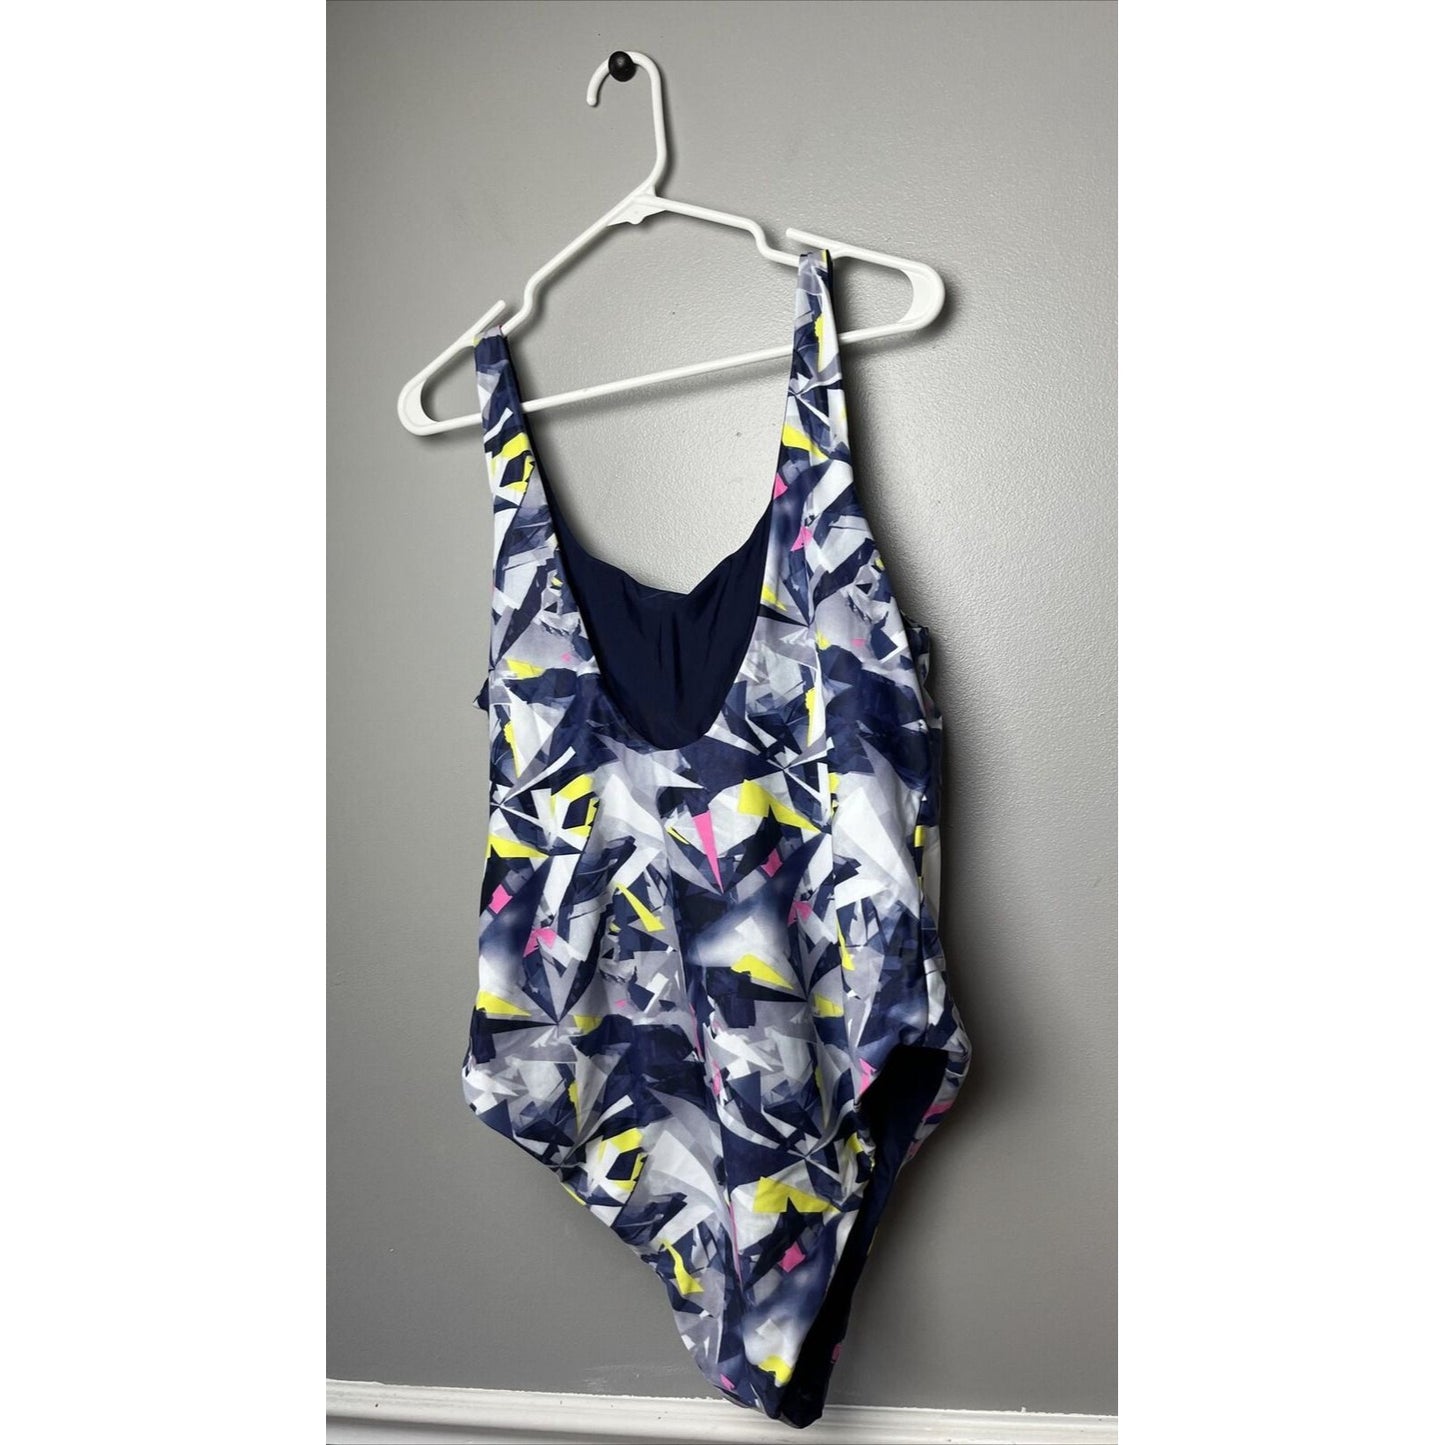 Attitudes by Renee Reversible Bathing Suit (NeonShatter/Nvy, X-Large) A500943